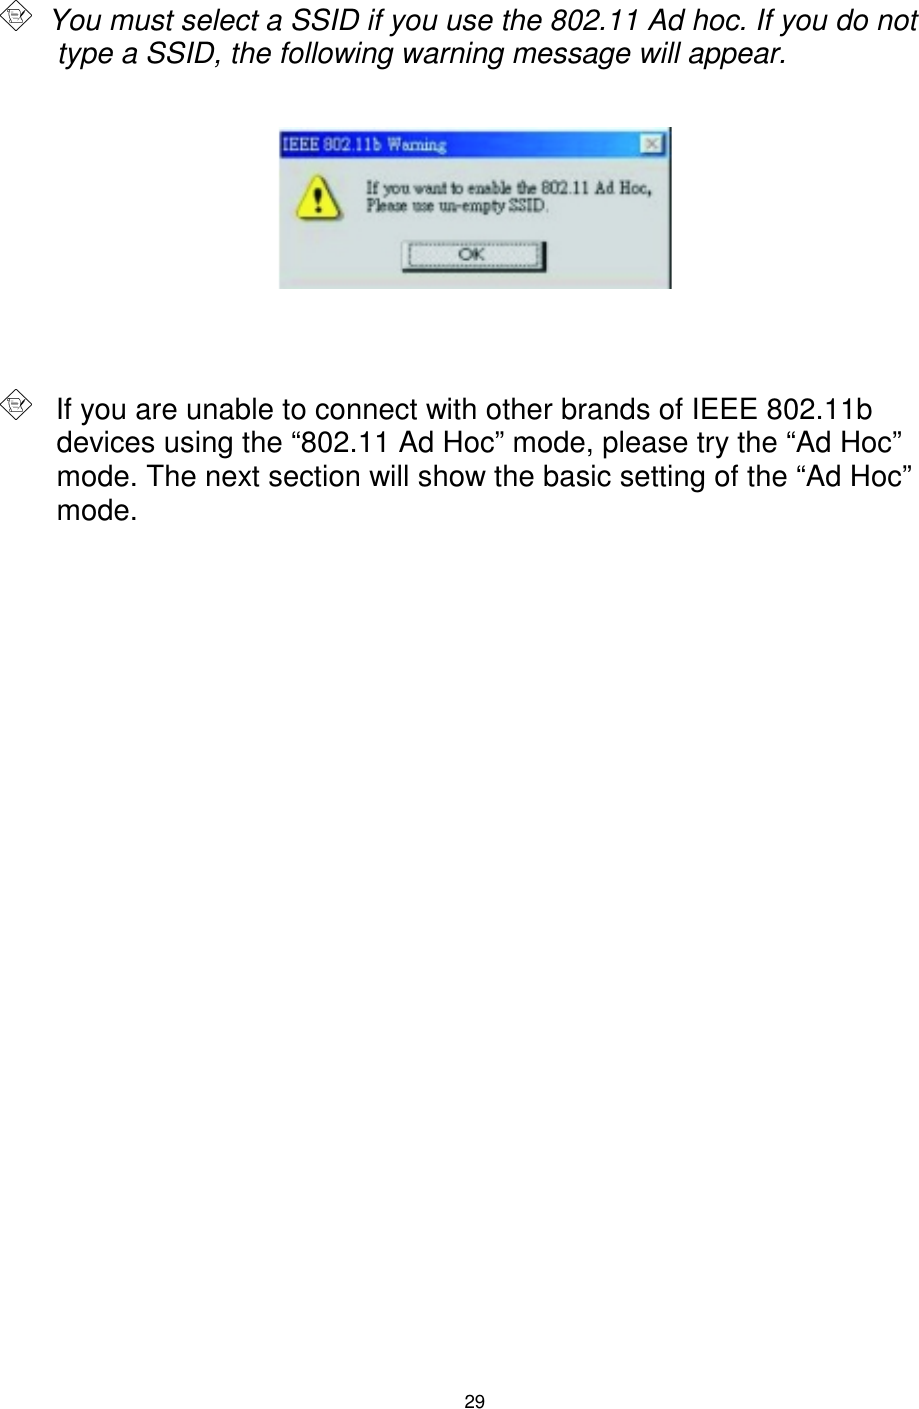  29      You must select a SSID if you use the 802.11 Ad hoc. If you do not type a SSID, the following warning message will appear.           If you are unable to connect with other brands of IEEE 802.11b devices using the “802.11 Ad Hoc” mode, please try the “Ad Hoc” mode. The next section will show the basic setting of the “Ad Hoc” mode. 